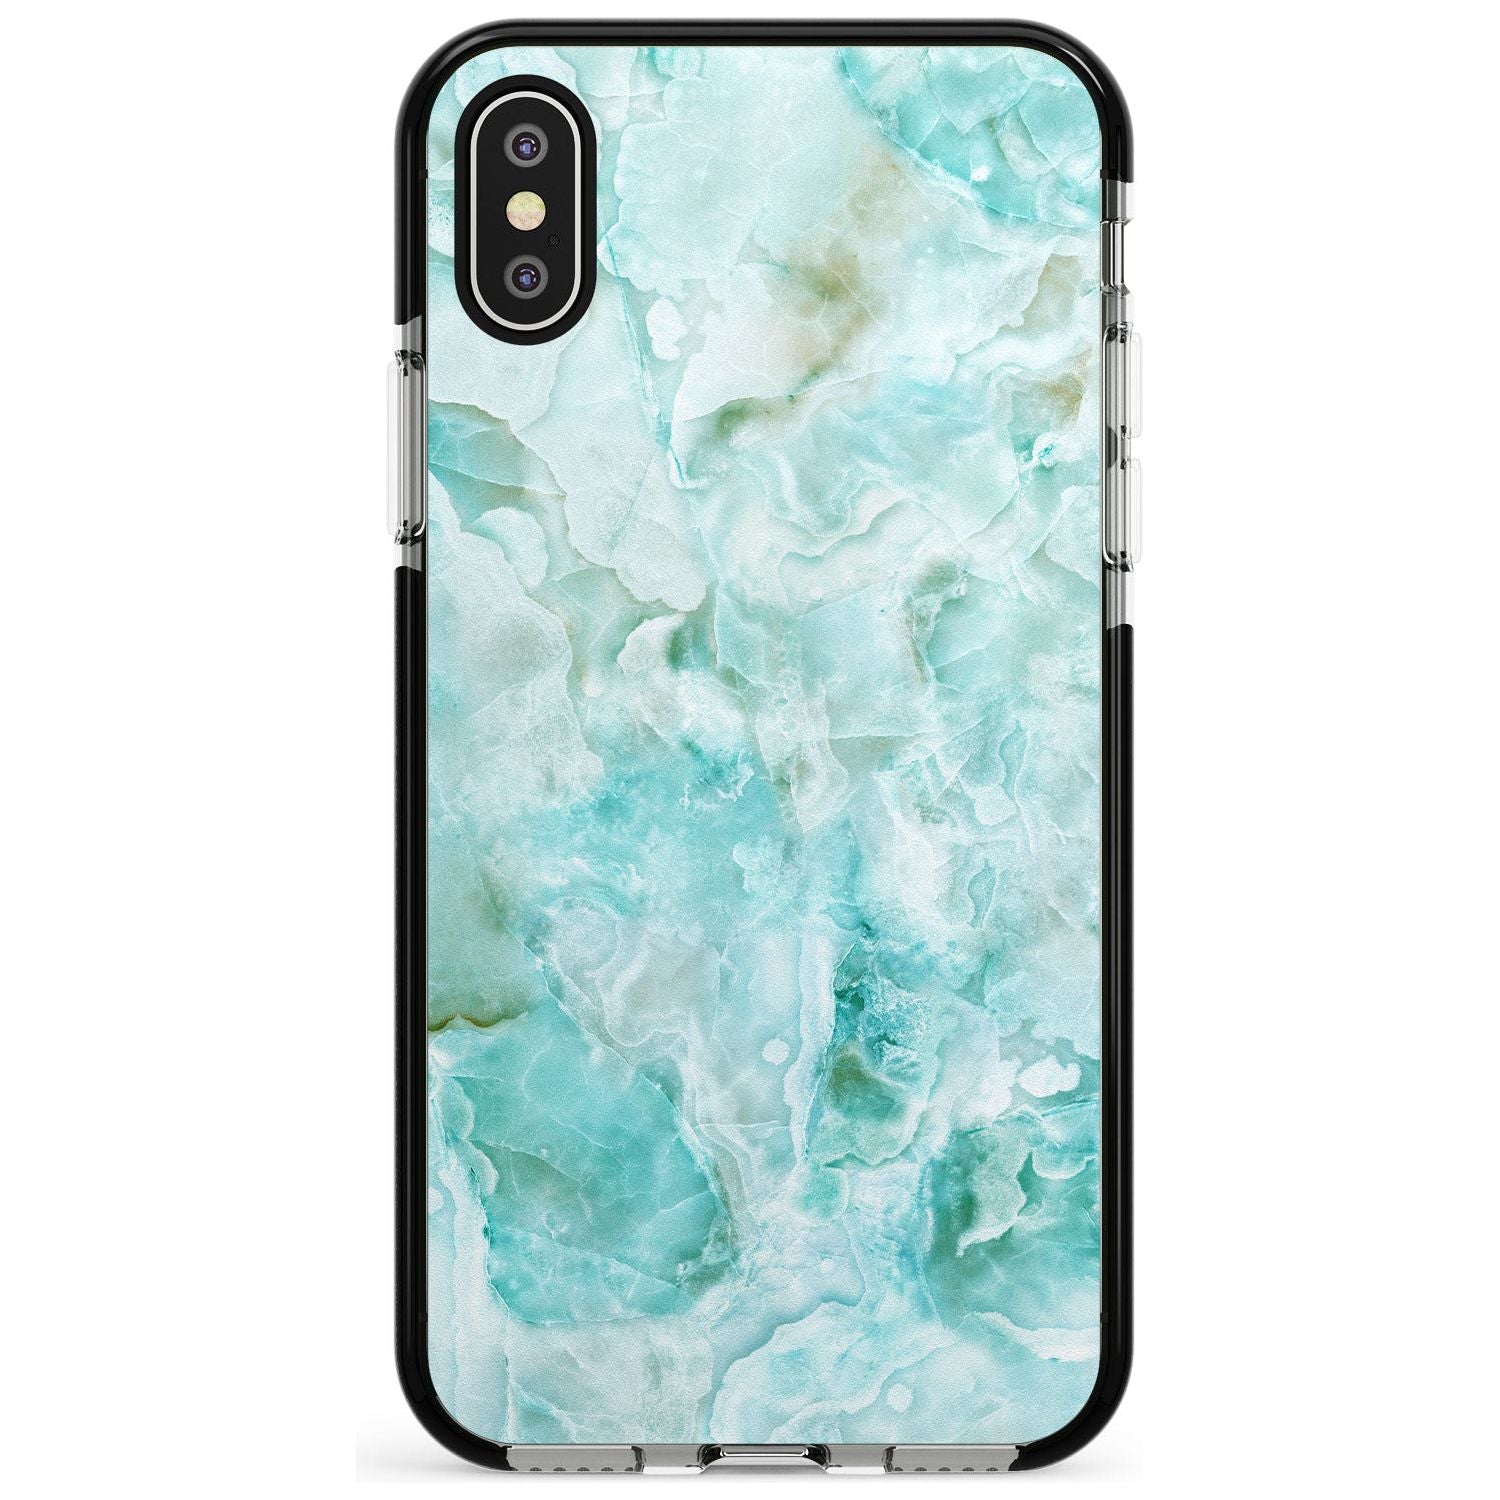 Turquoise Aqua Onyx Marble Pink Fade Impact Phone Case for iPhone X XS Max XR